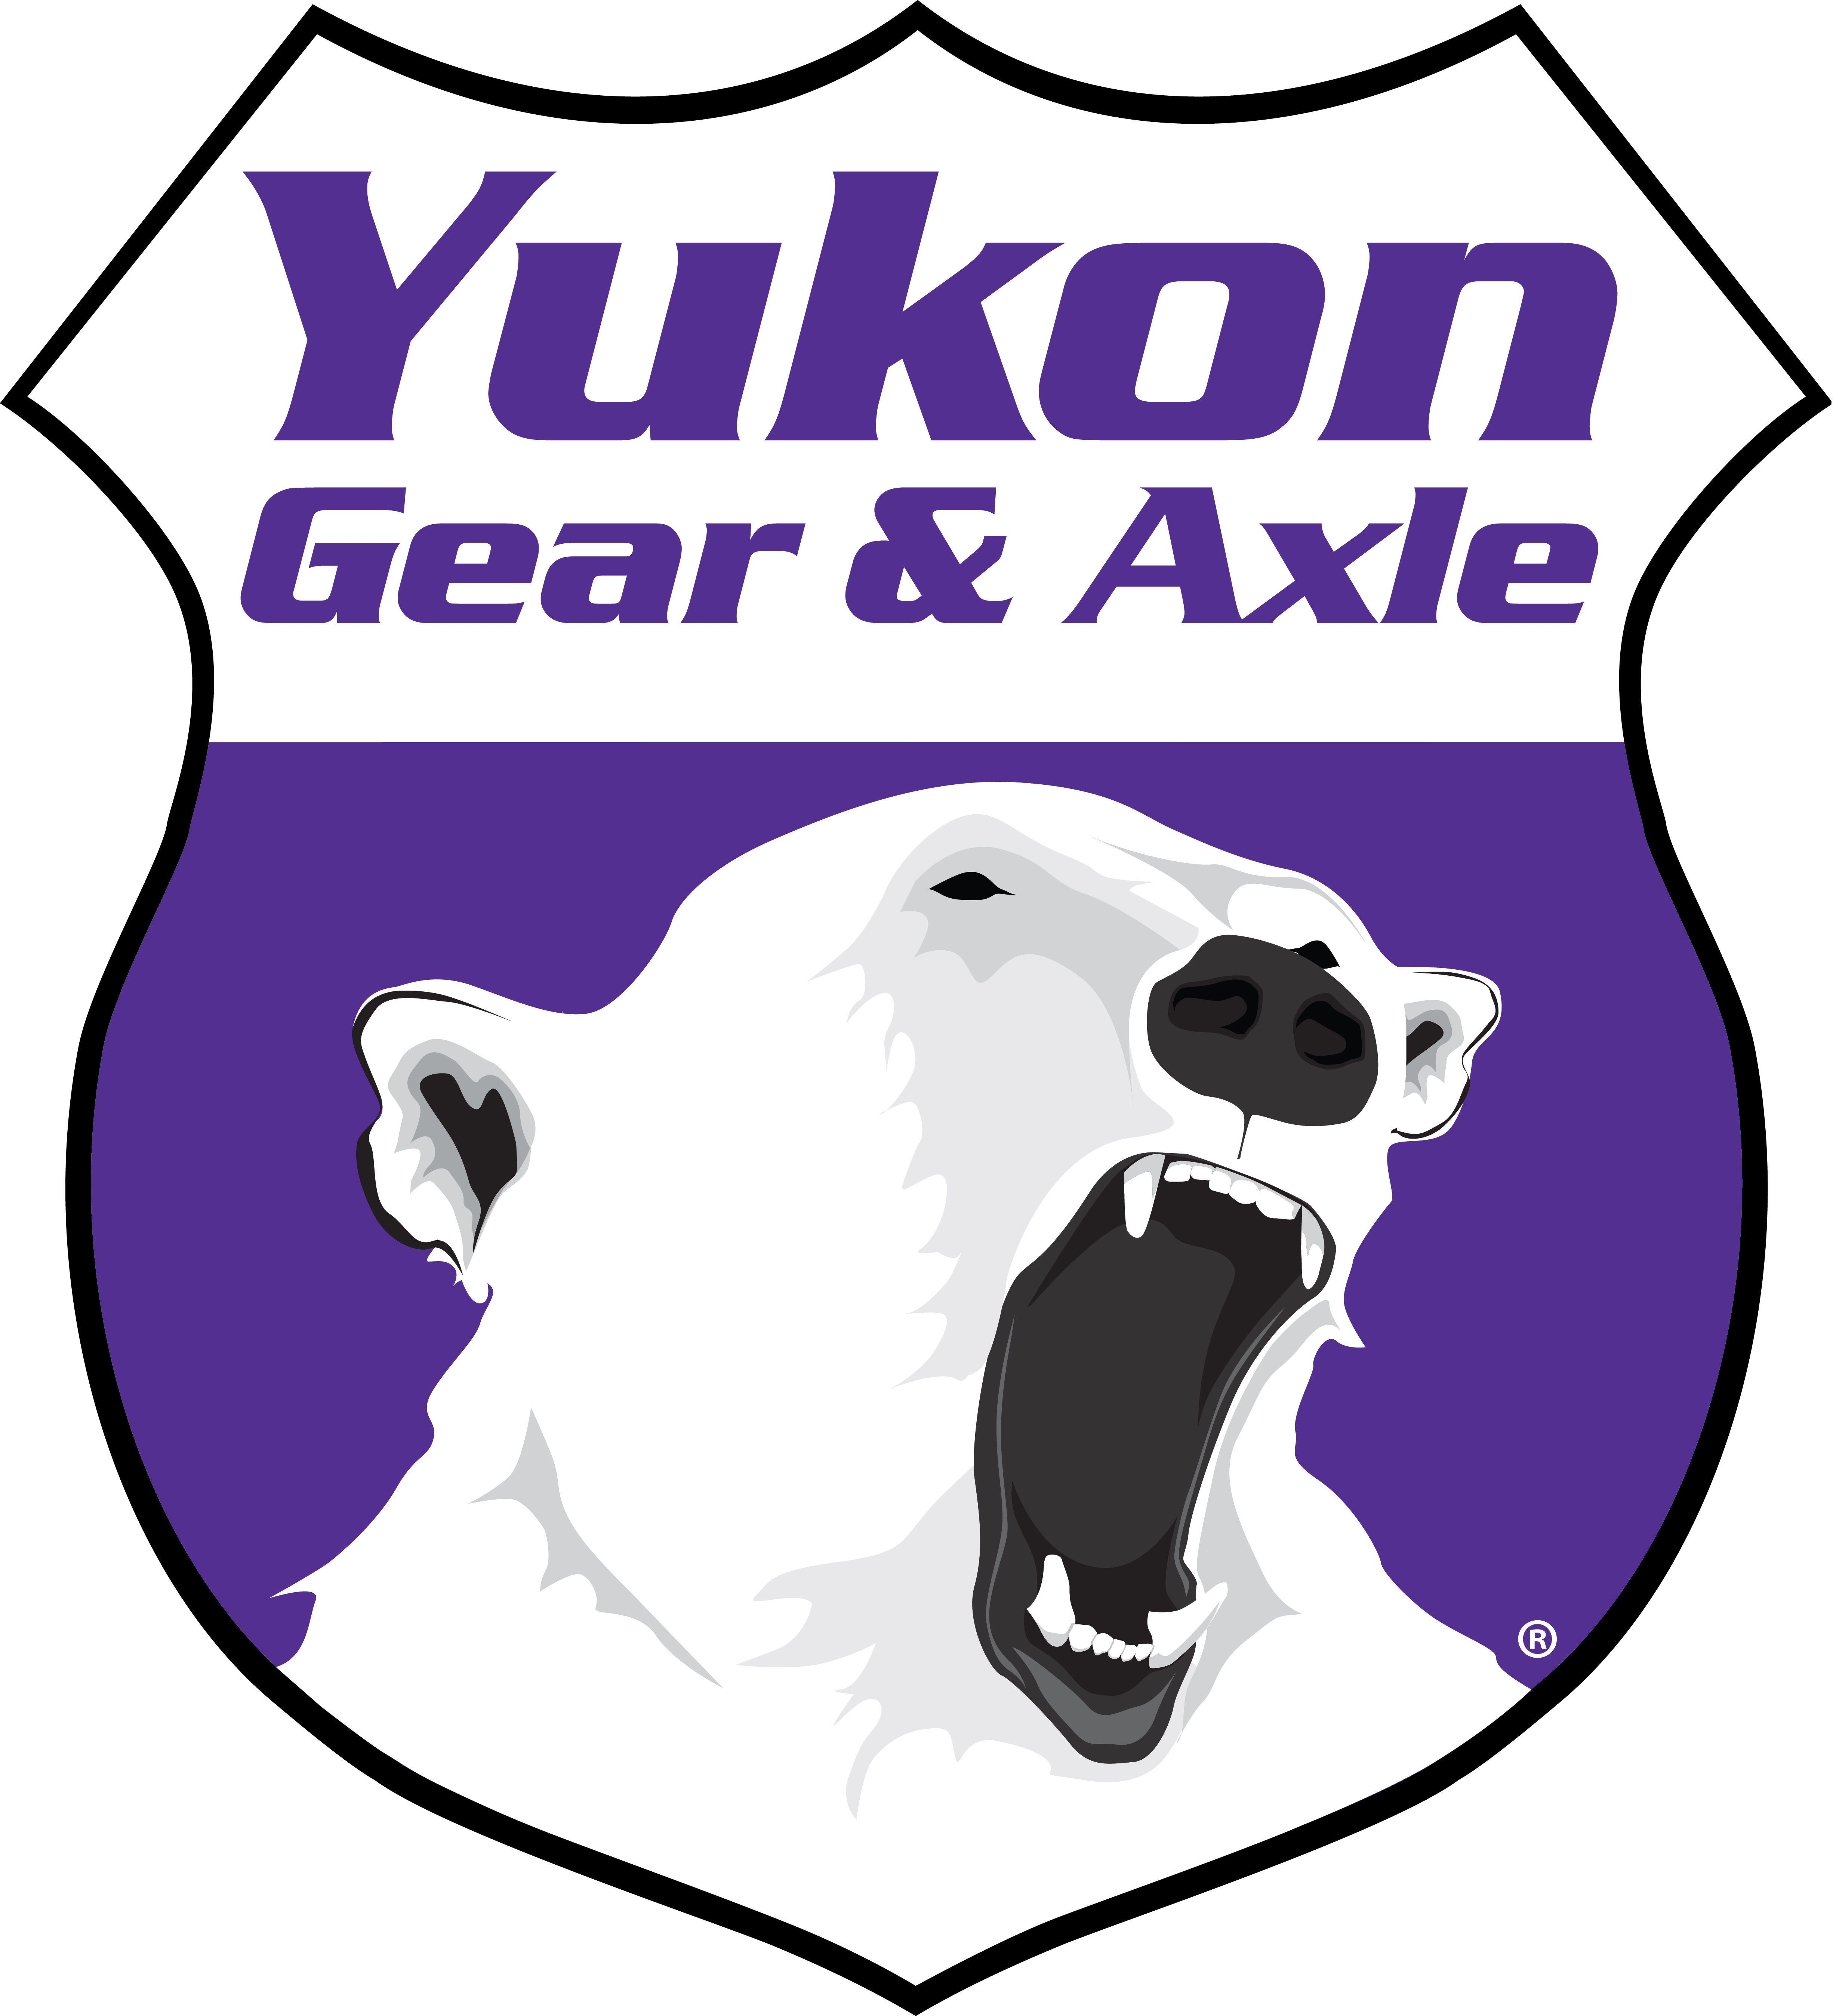 Yukon Minor install kit for Dana 60 and 61 front differential 